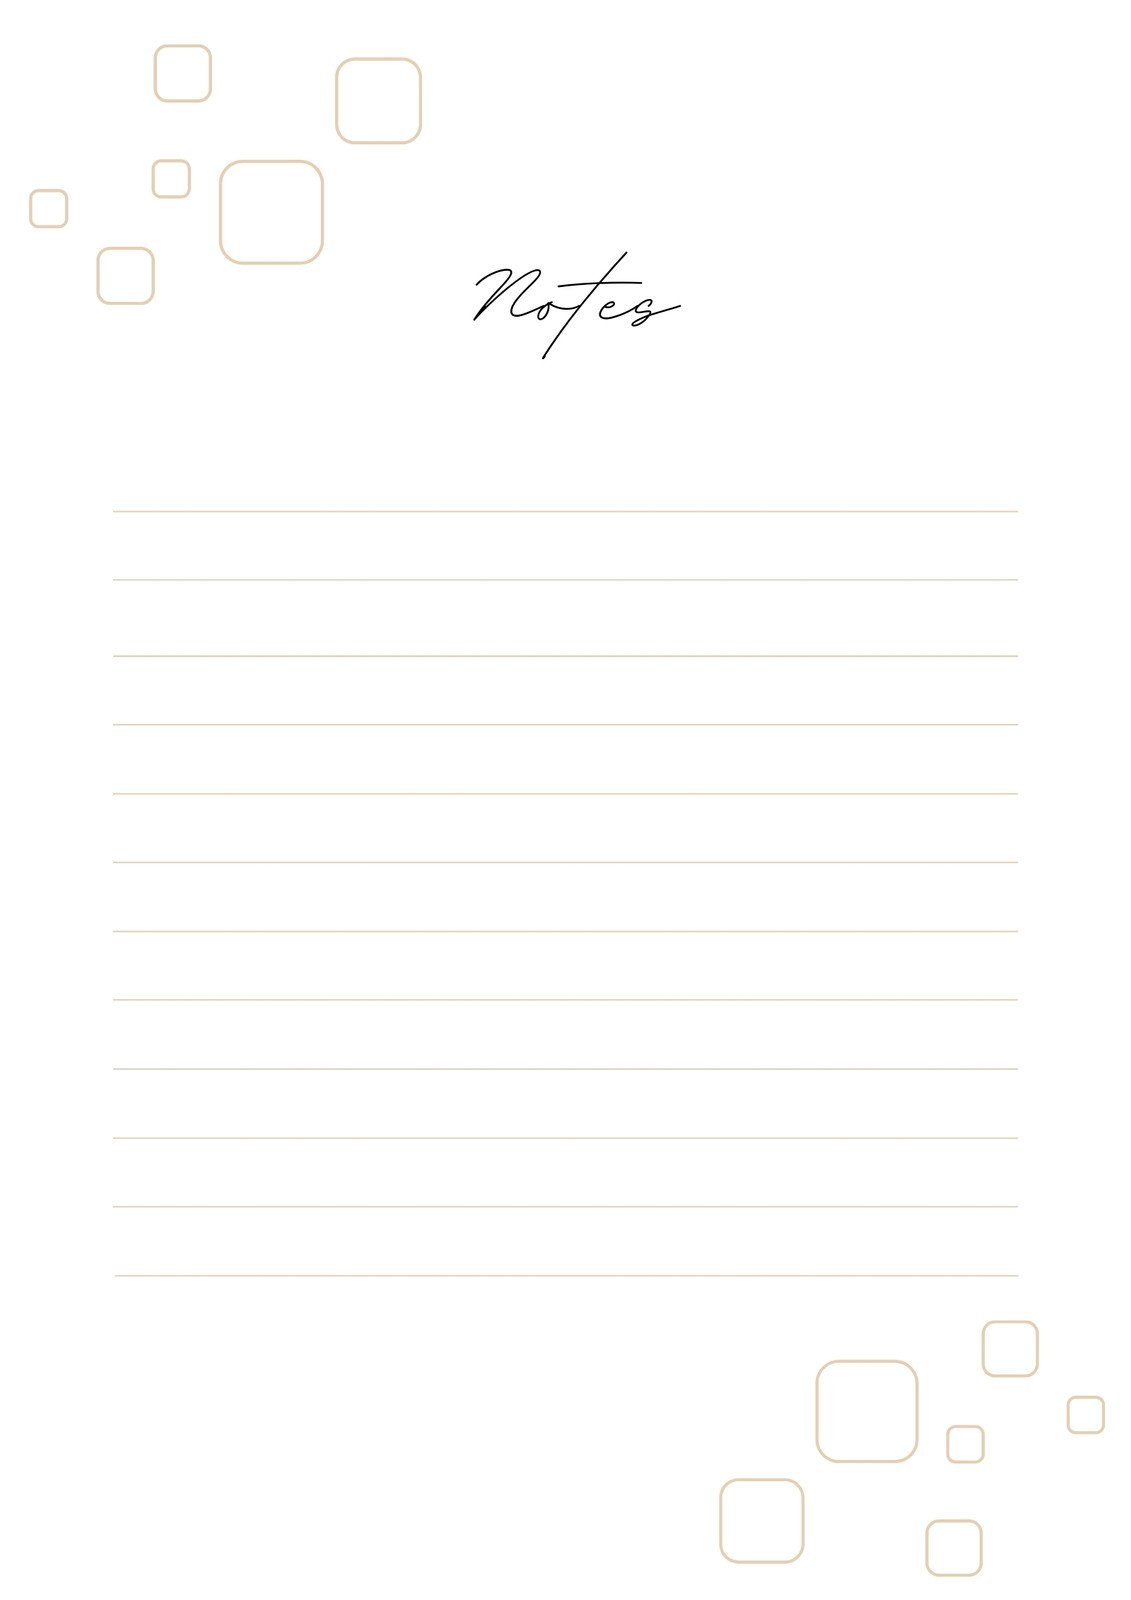 Dotted Grid Paper Template,Lined Paper Graphic by watercolortheme